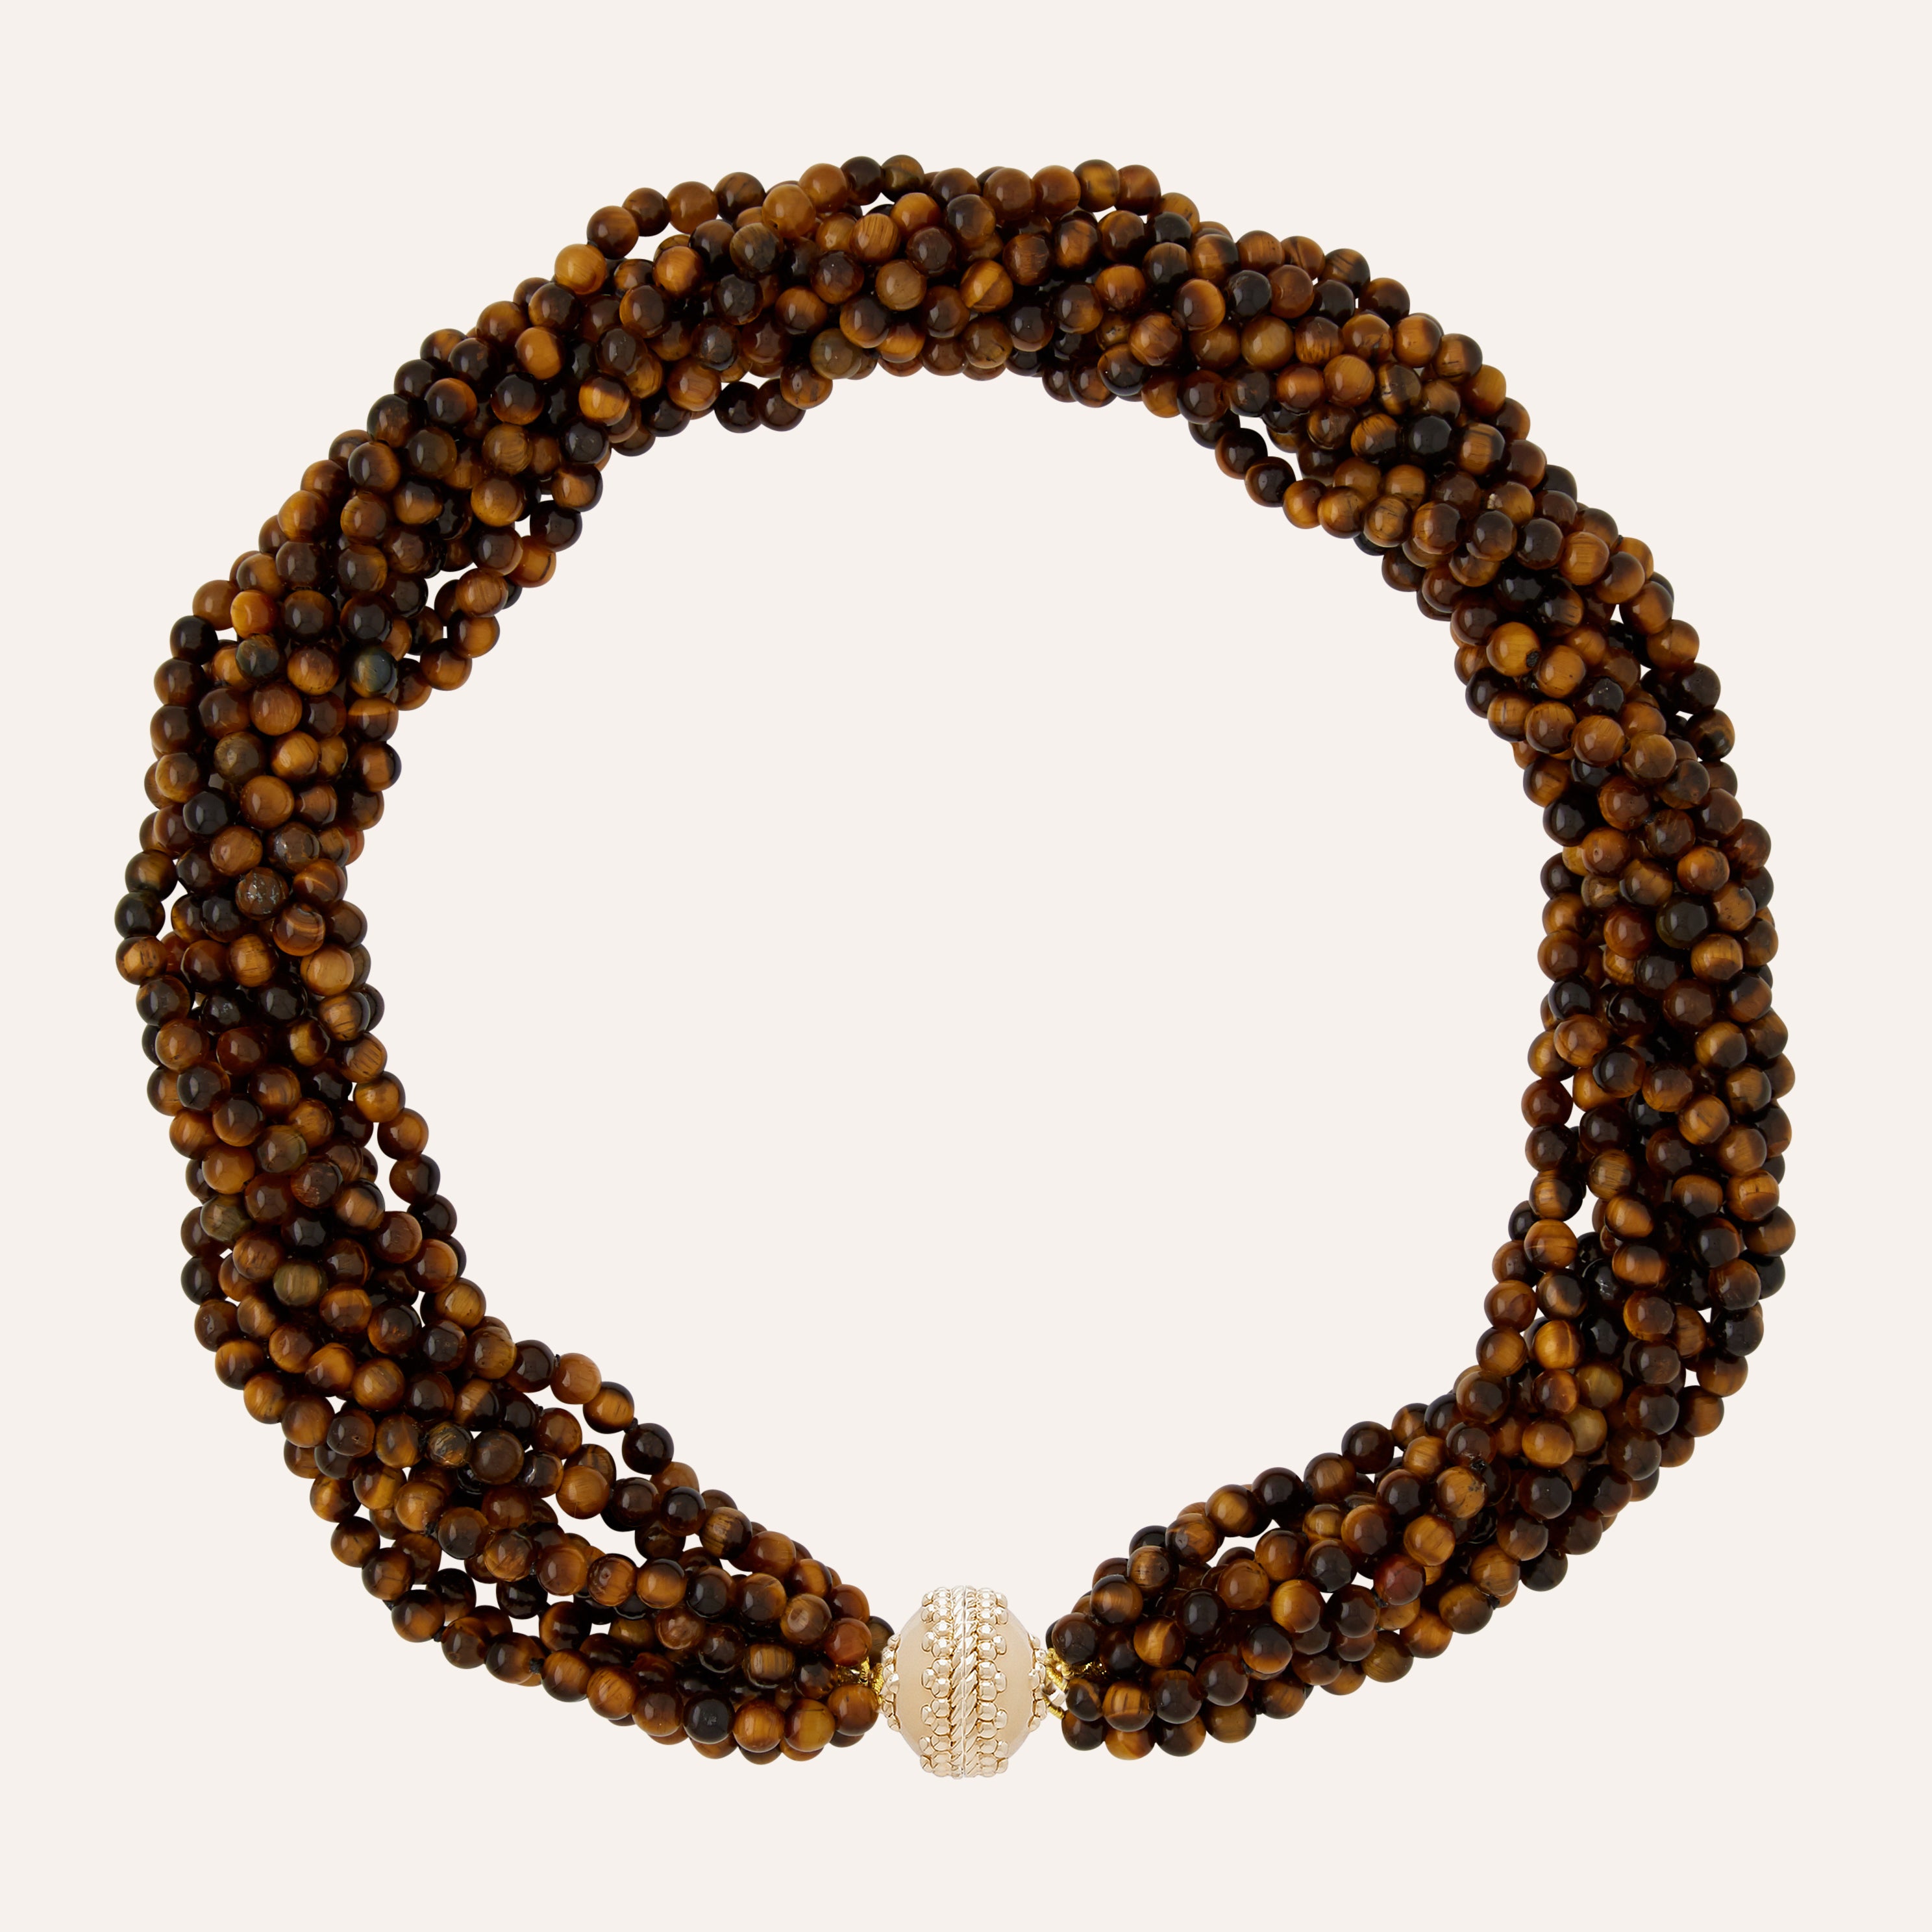 Victoire 4mm Tiger's Eye Multi-Strand Necklace